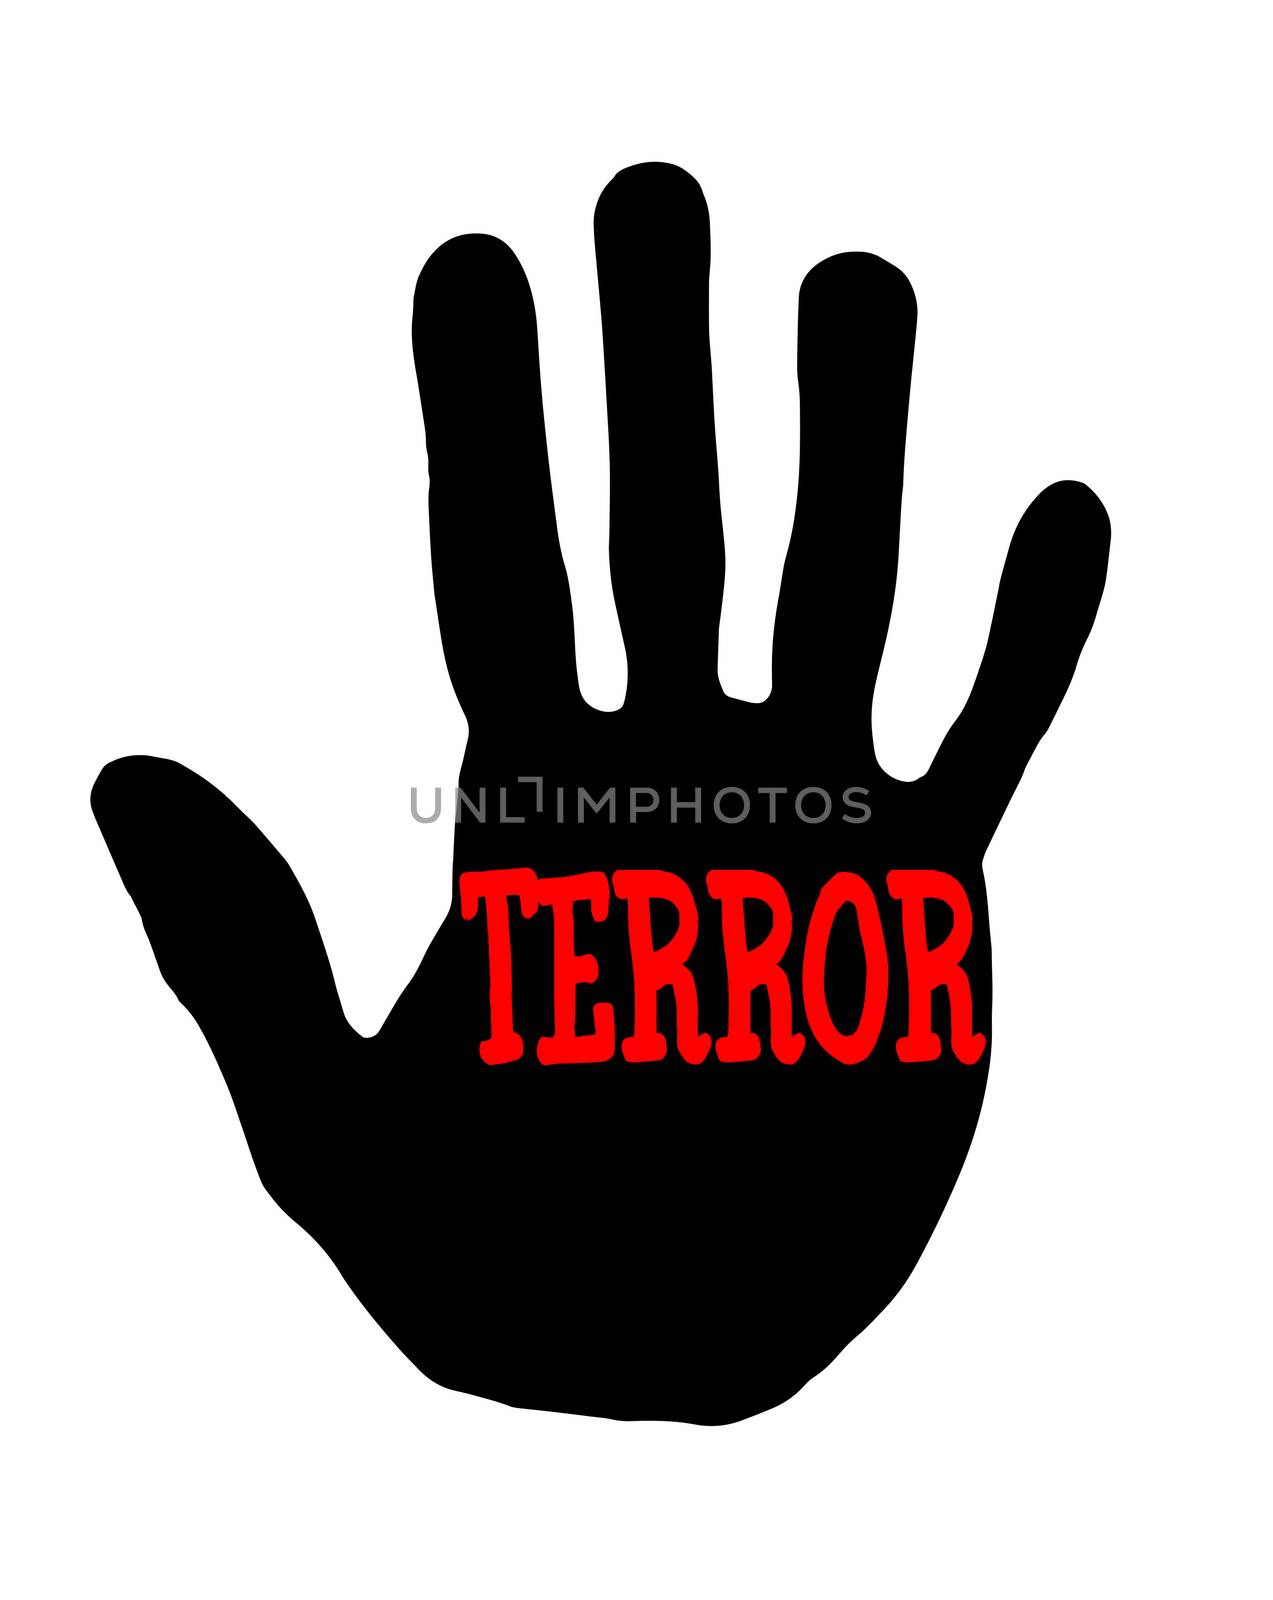 Man handprint isolated on white background showing stop terror